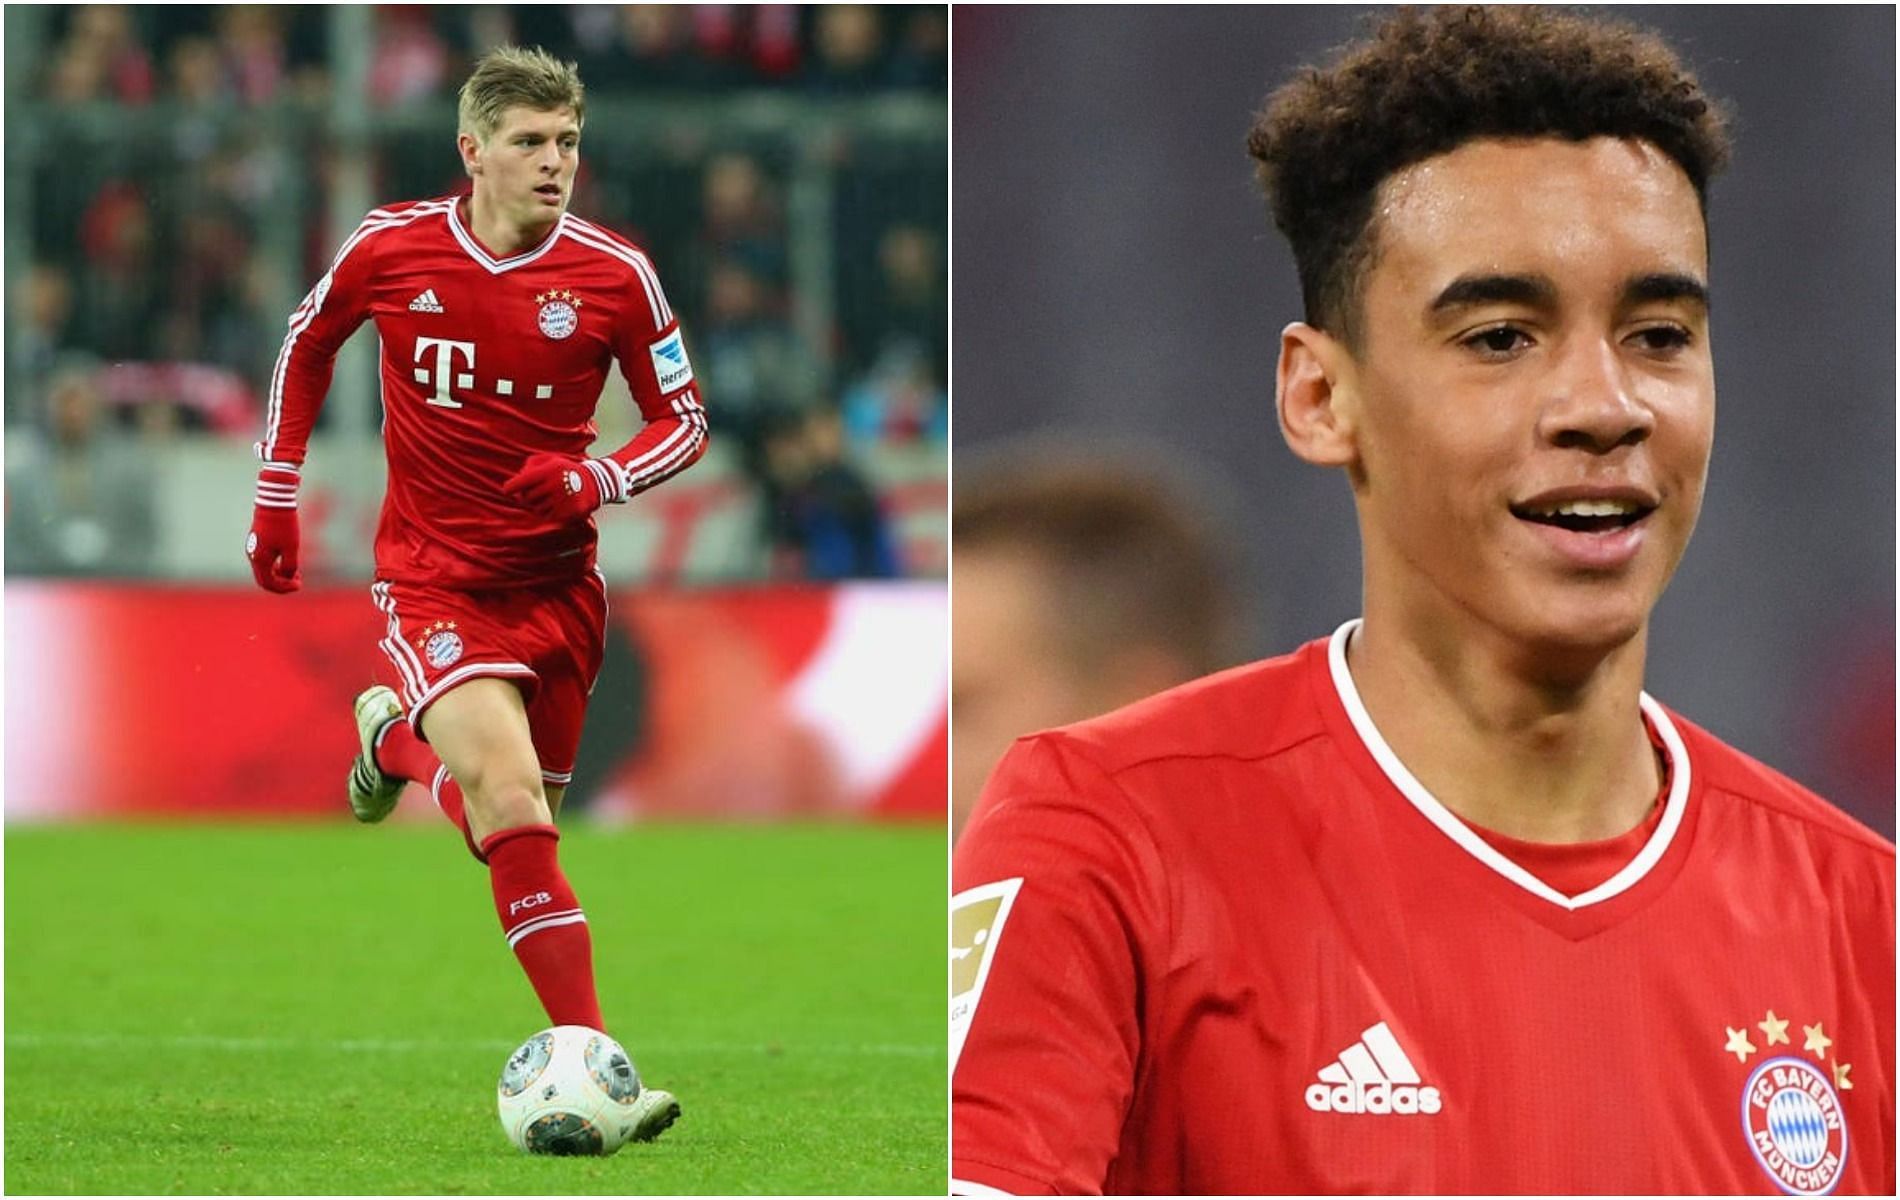 Bayern Munich have wonderkids and stars among their youngest goal scorers (Images via Bundesliga)